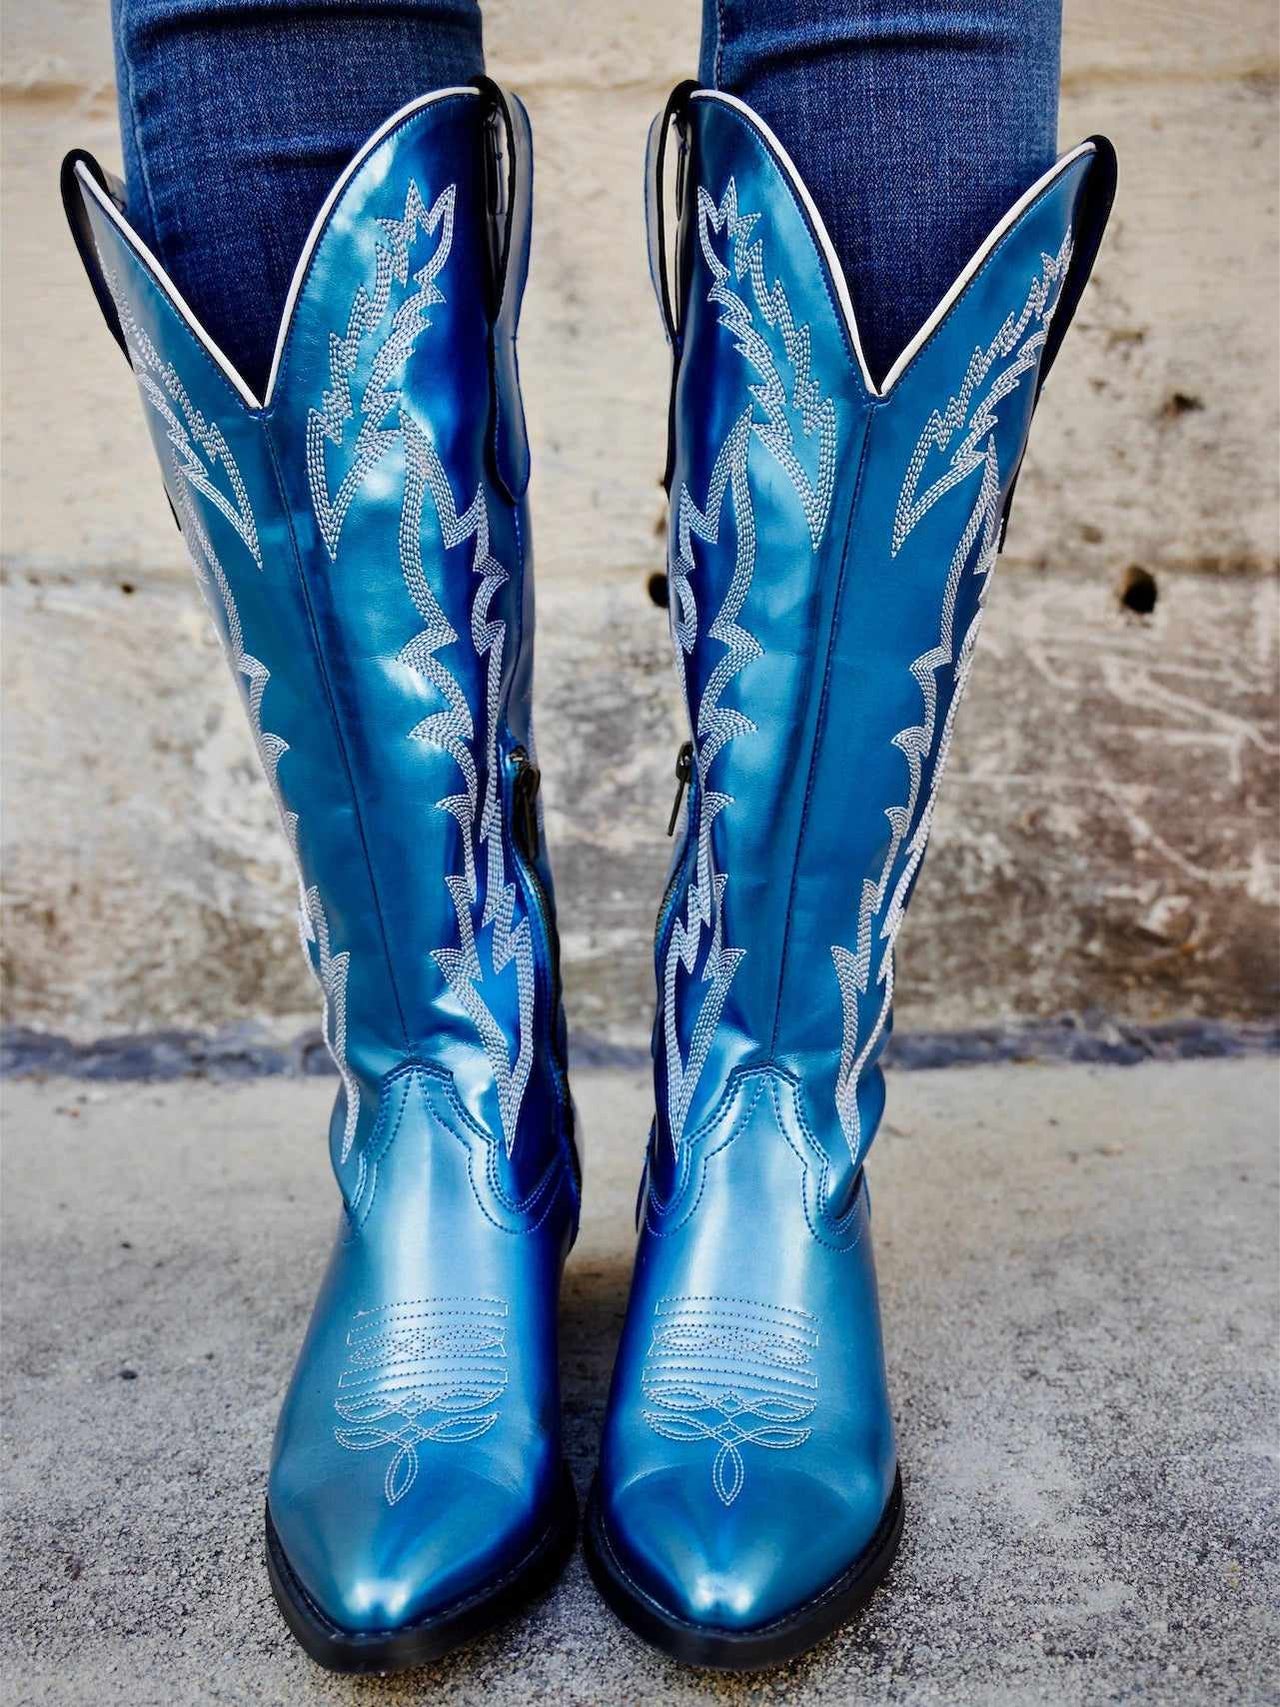 Blue cowgirl boots.